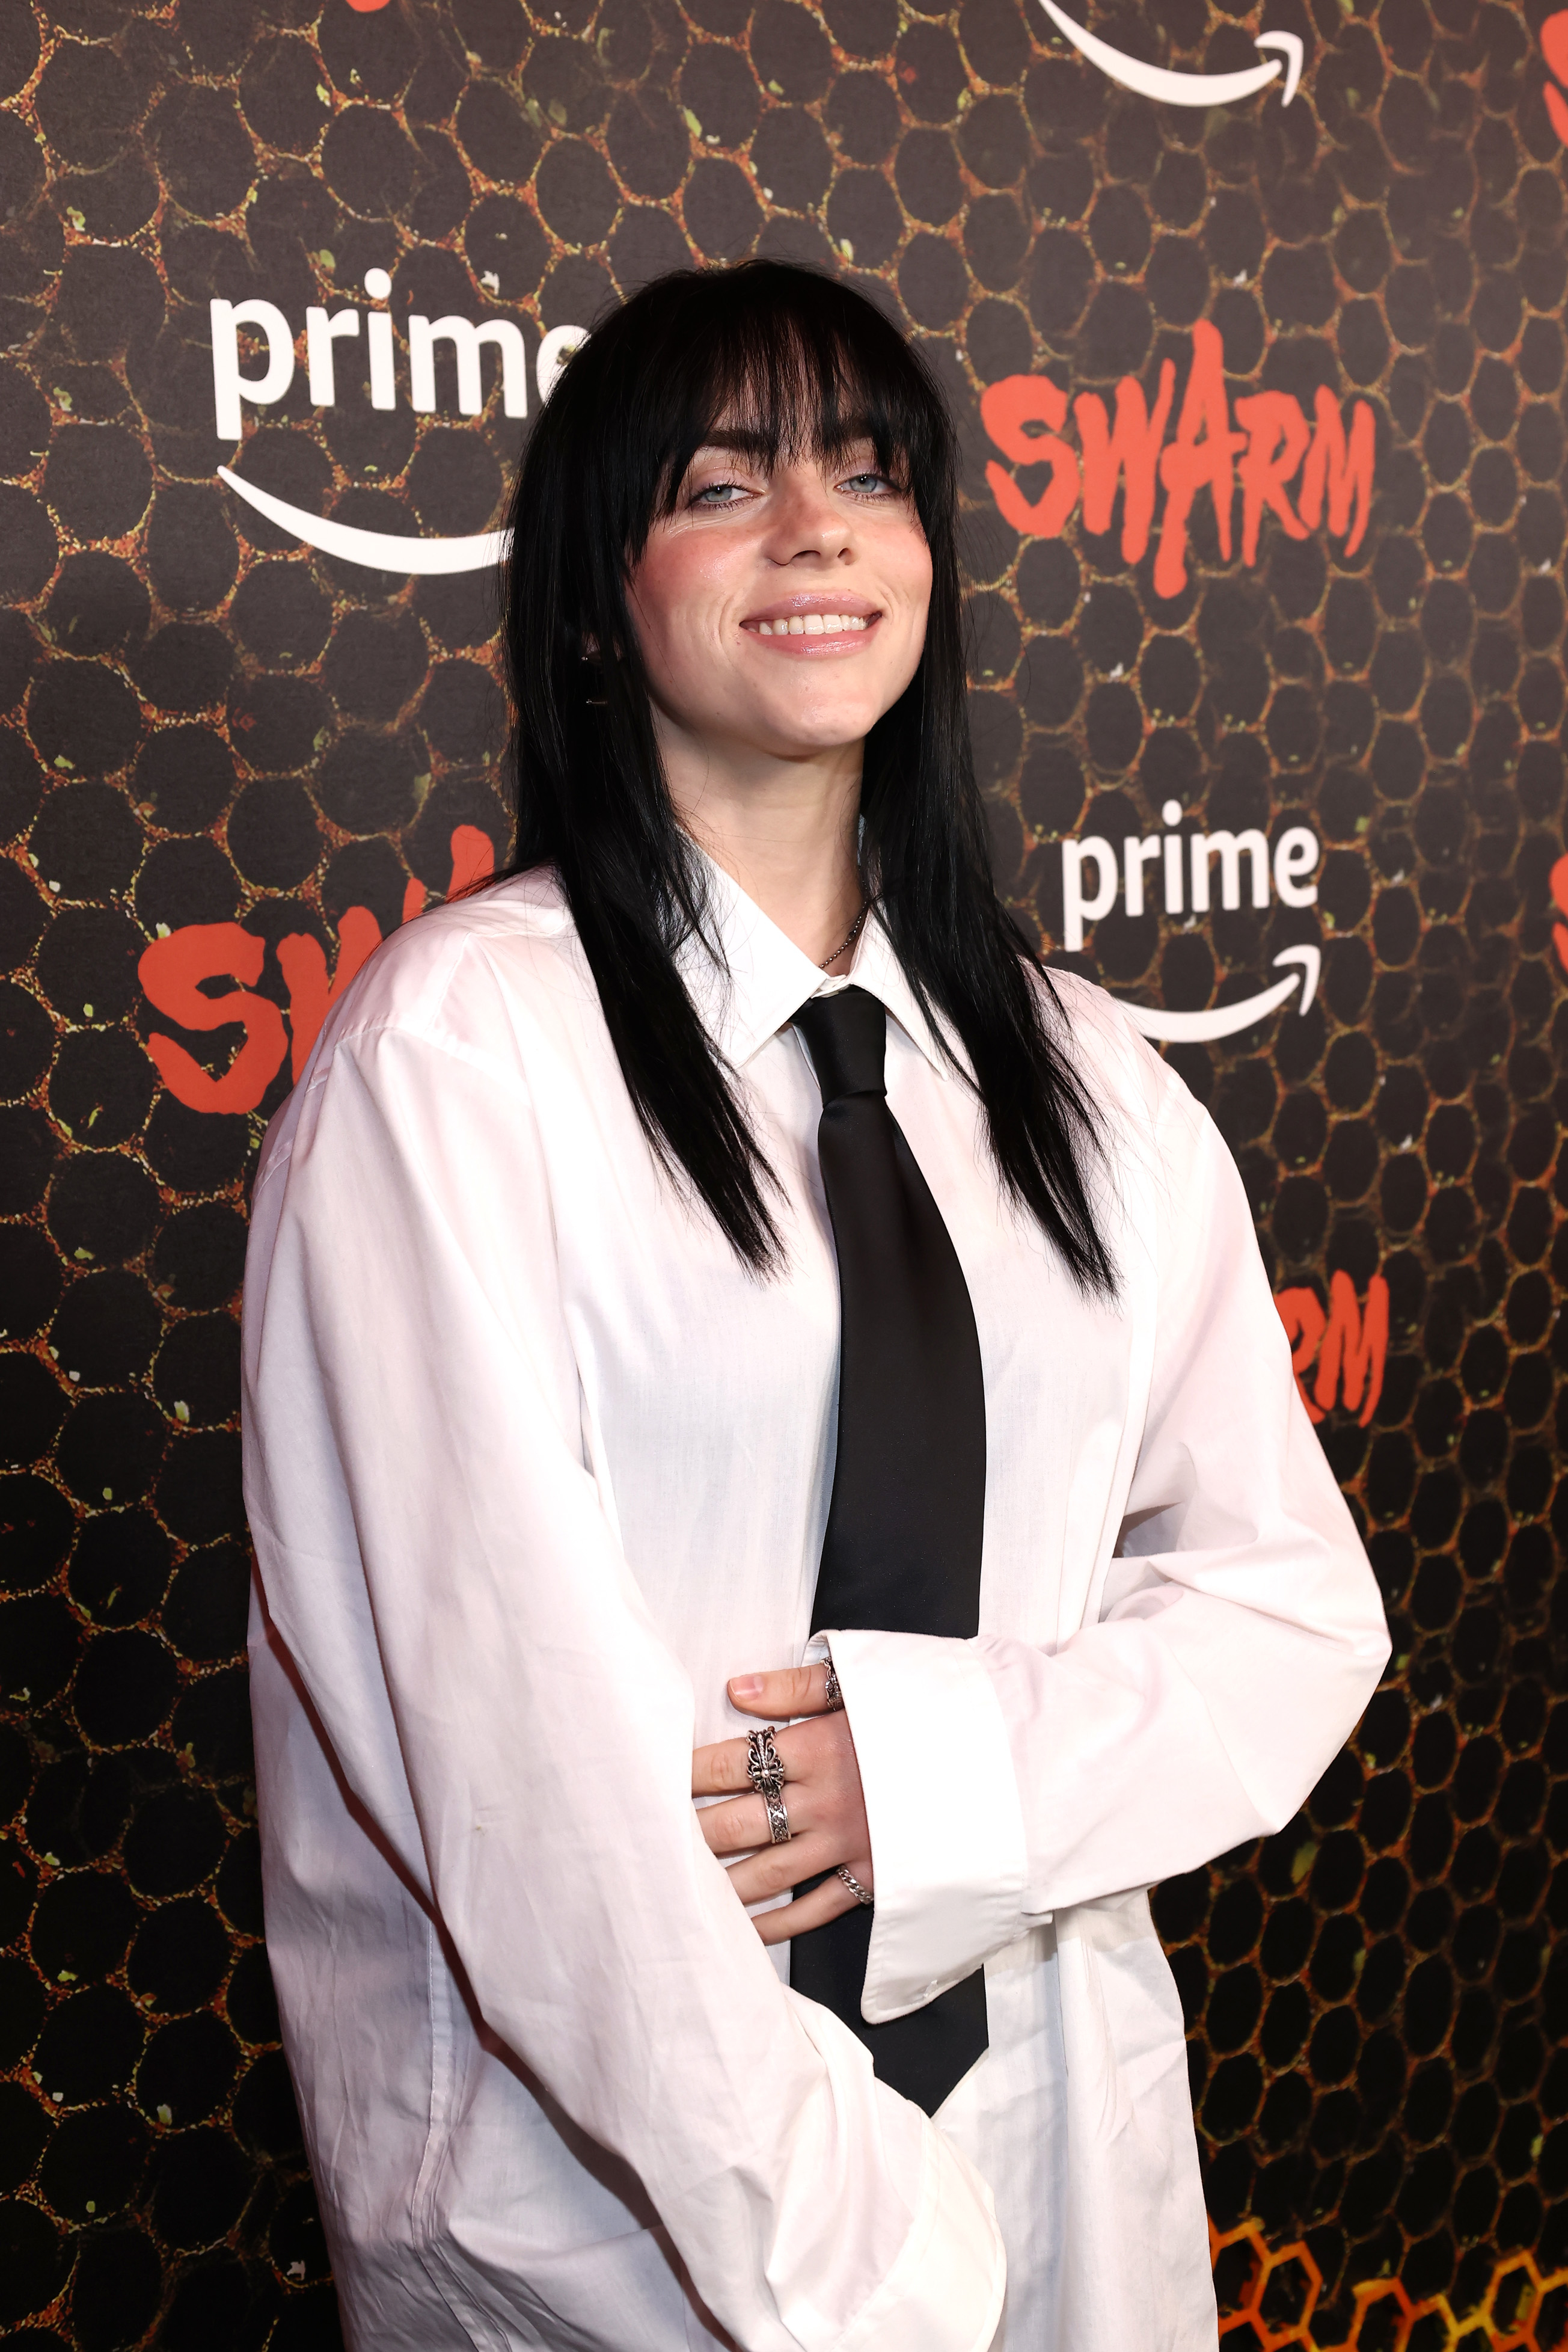 Close-up of Billie smiling at a media event in an oversize shirt and tie